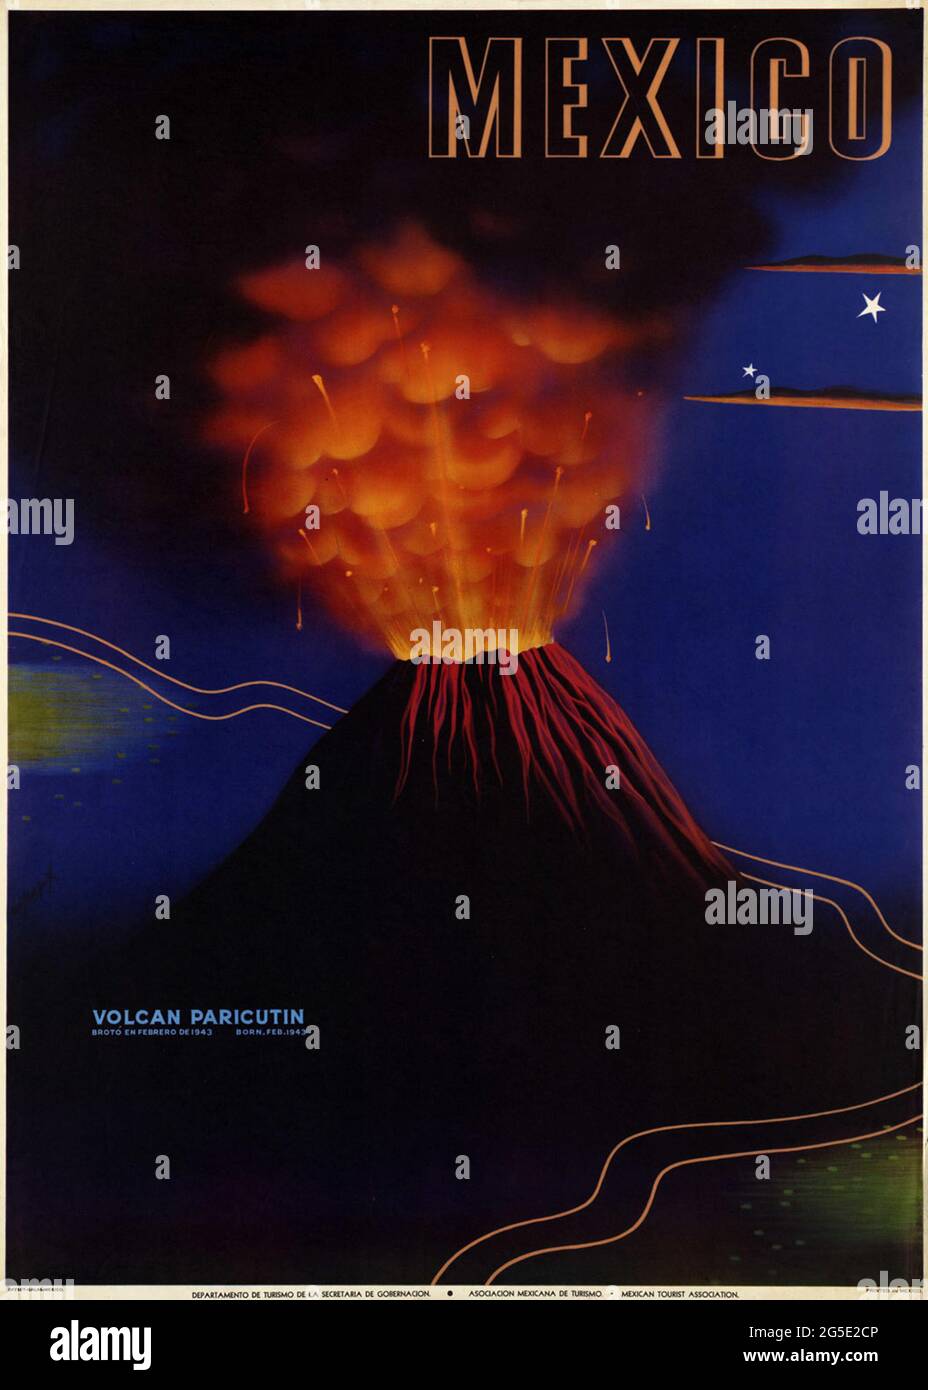 A vintage travel poster for Mexico showing the volcano Paricutin erupting Stock Photo